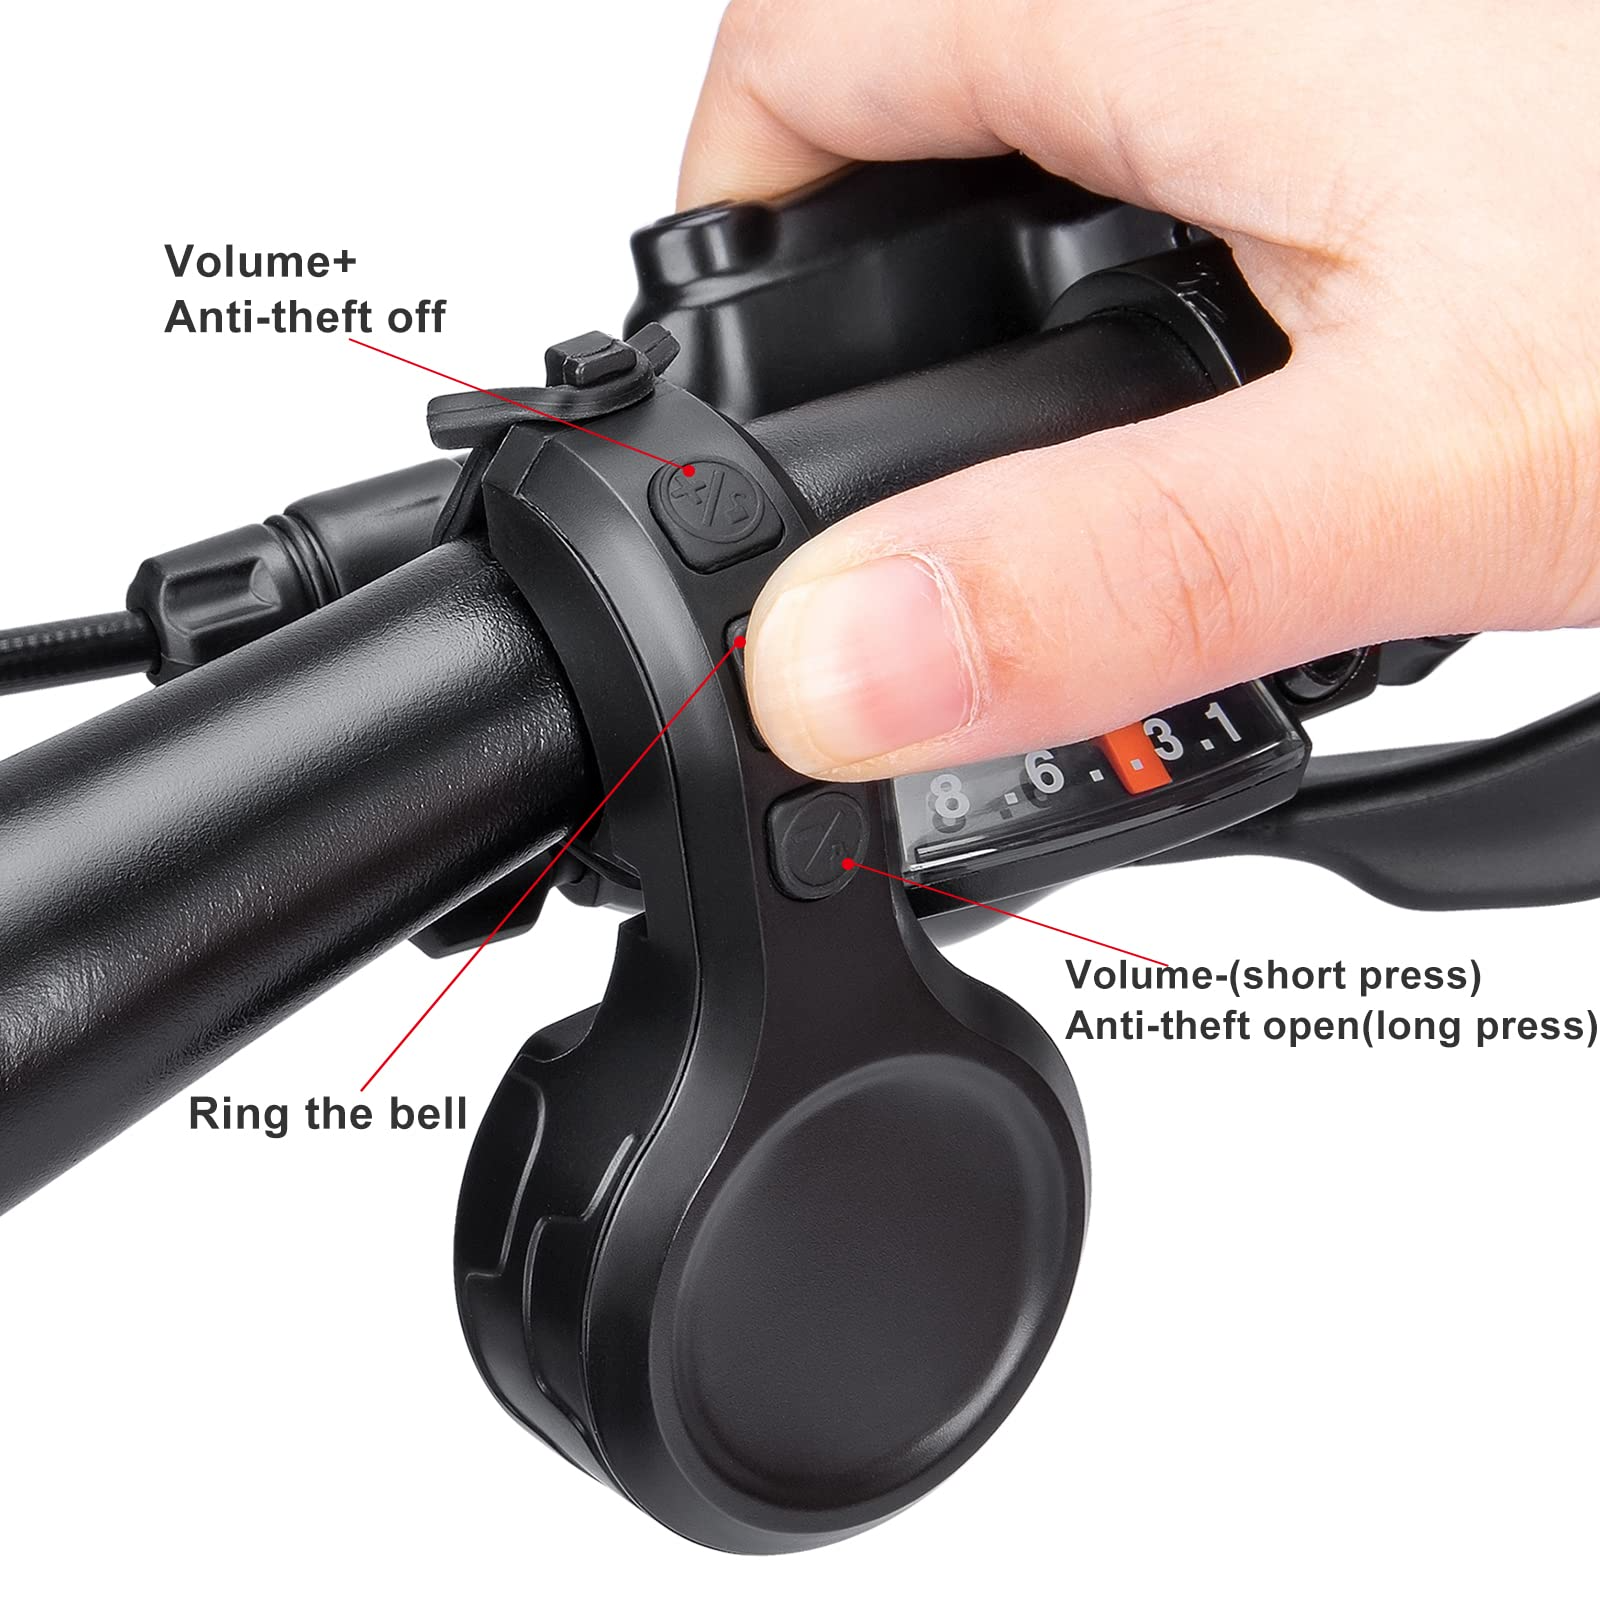 Electric Bike Bells 80-130dB - IPX6 Waterproof USB Rechargeable Bike Horns, Anti-Theft Alarm Cycling Bicycle Bell Handlebar Rings